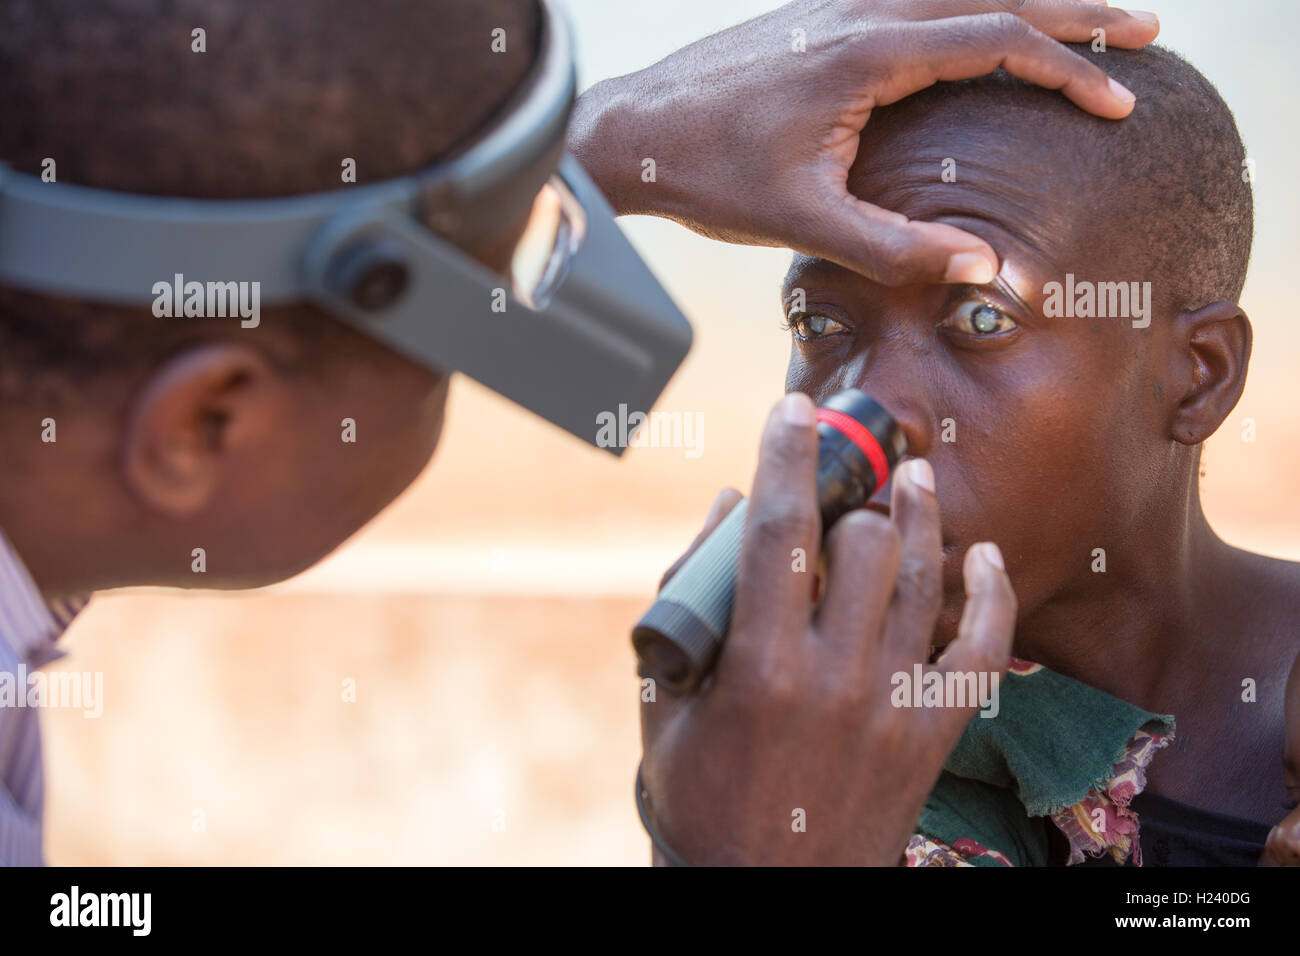 Ribaue Hospital,  Ribaue, Nampula Province, Mozambique, August 2015: Laurinda Diago having having her eyes checked by Ophthamologist Dr Anselmo Vilanculo. Photo by Mike Goldwater Stock Photo